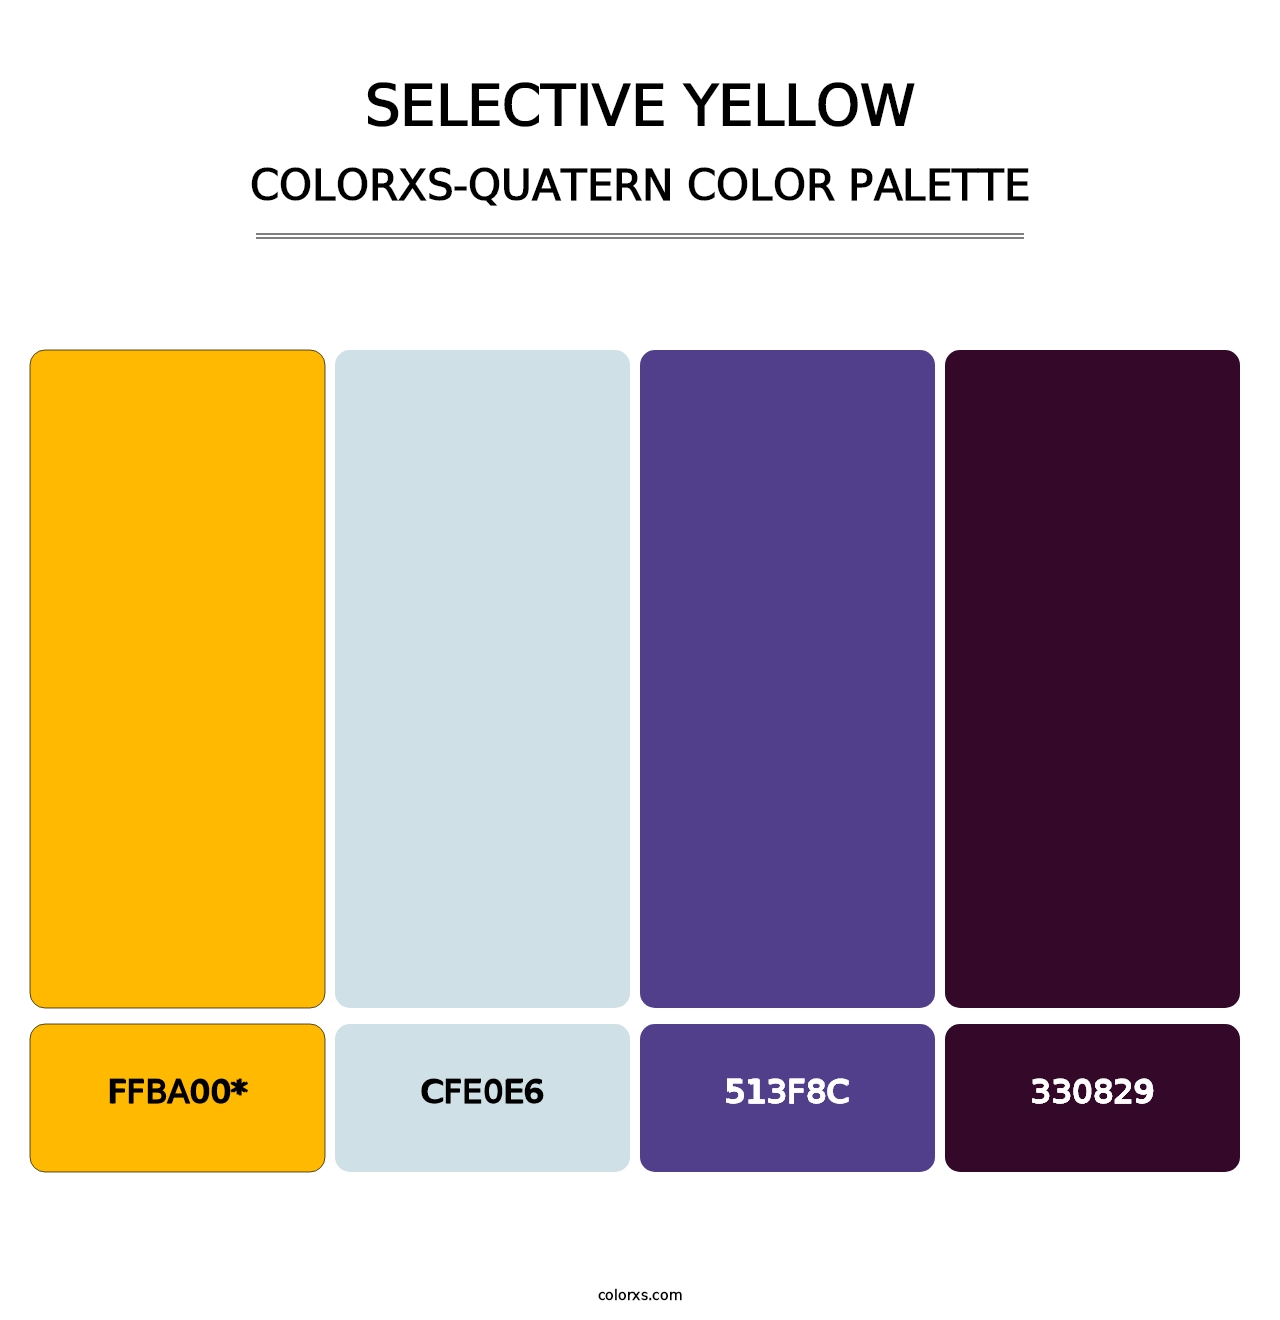 Selective yellow - Colorxs Quatern Palette